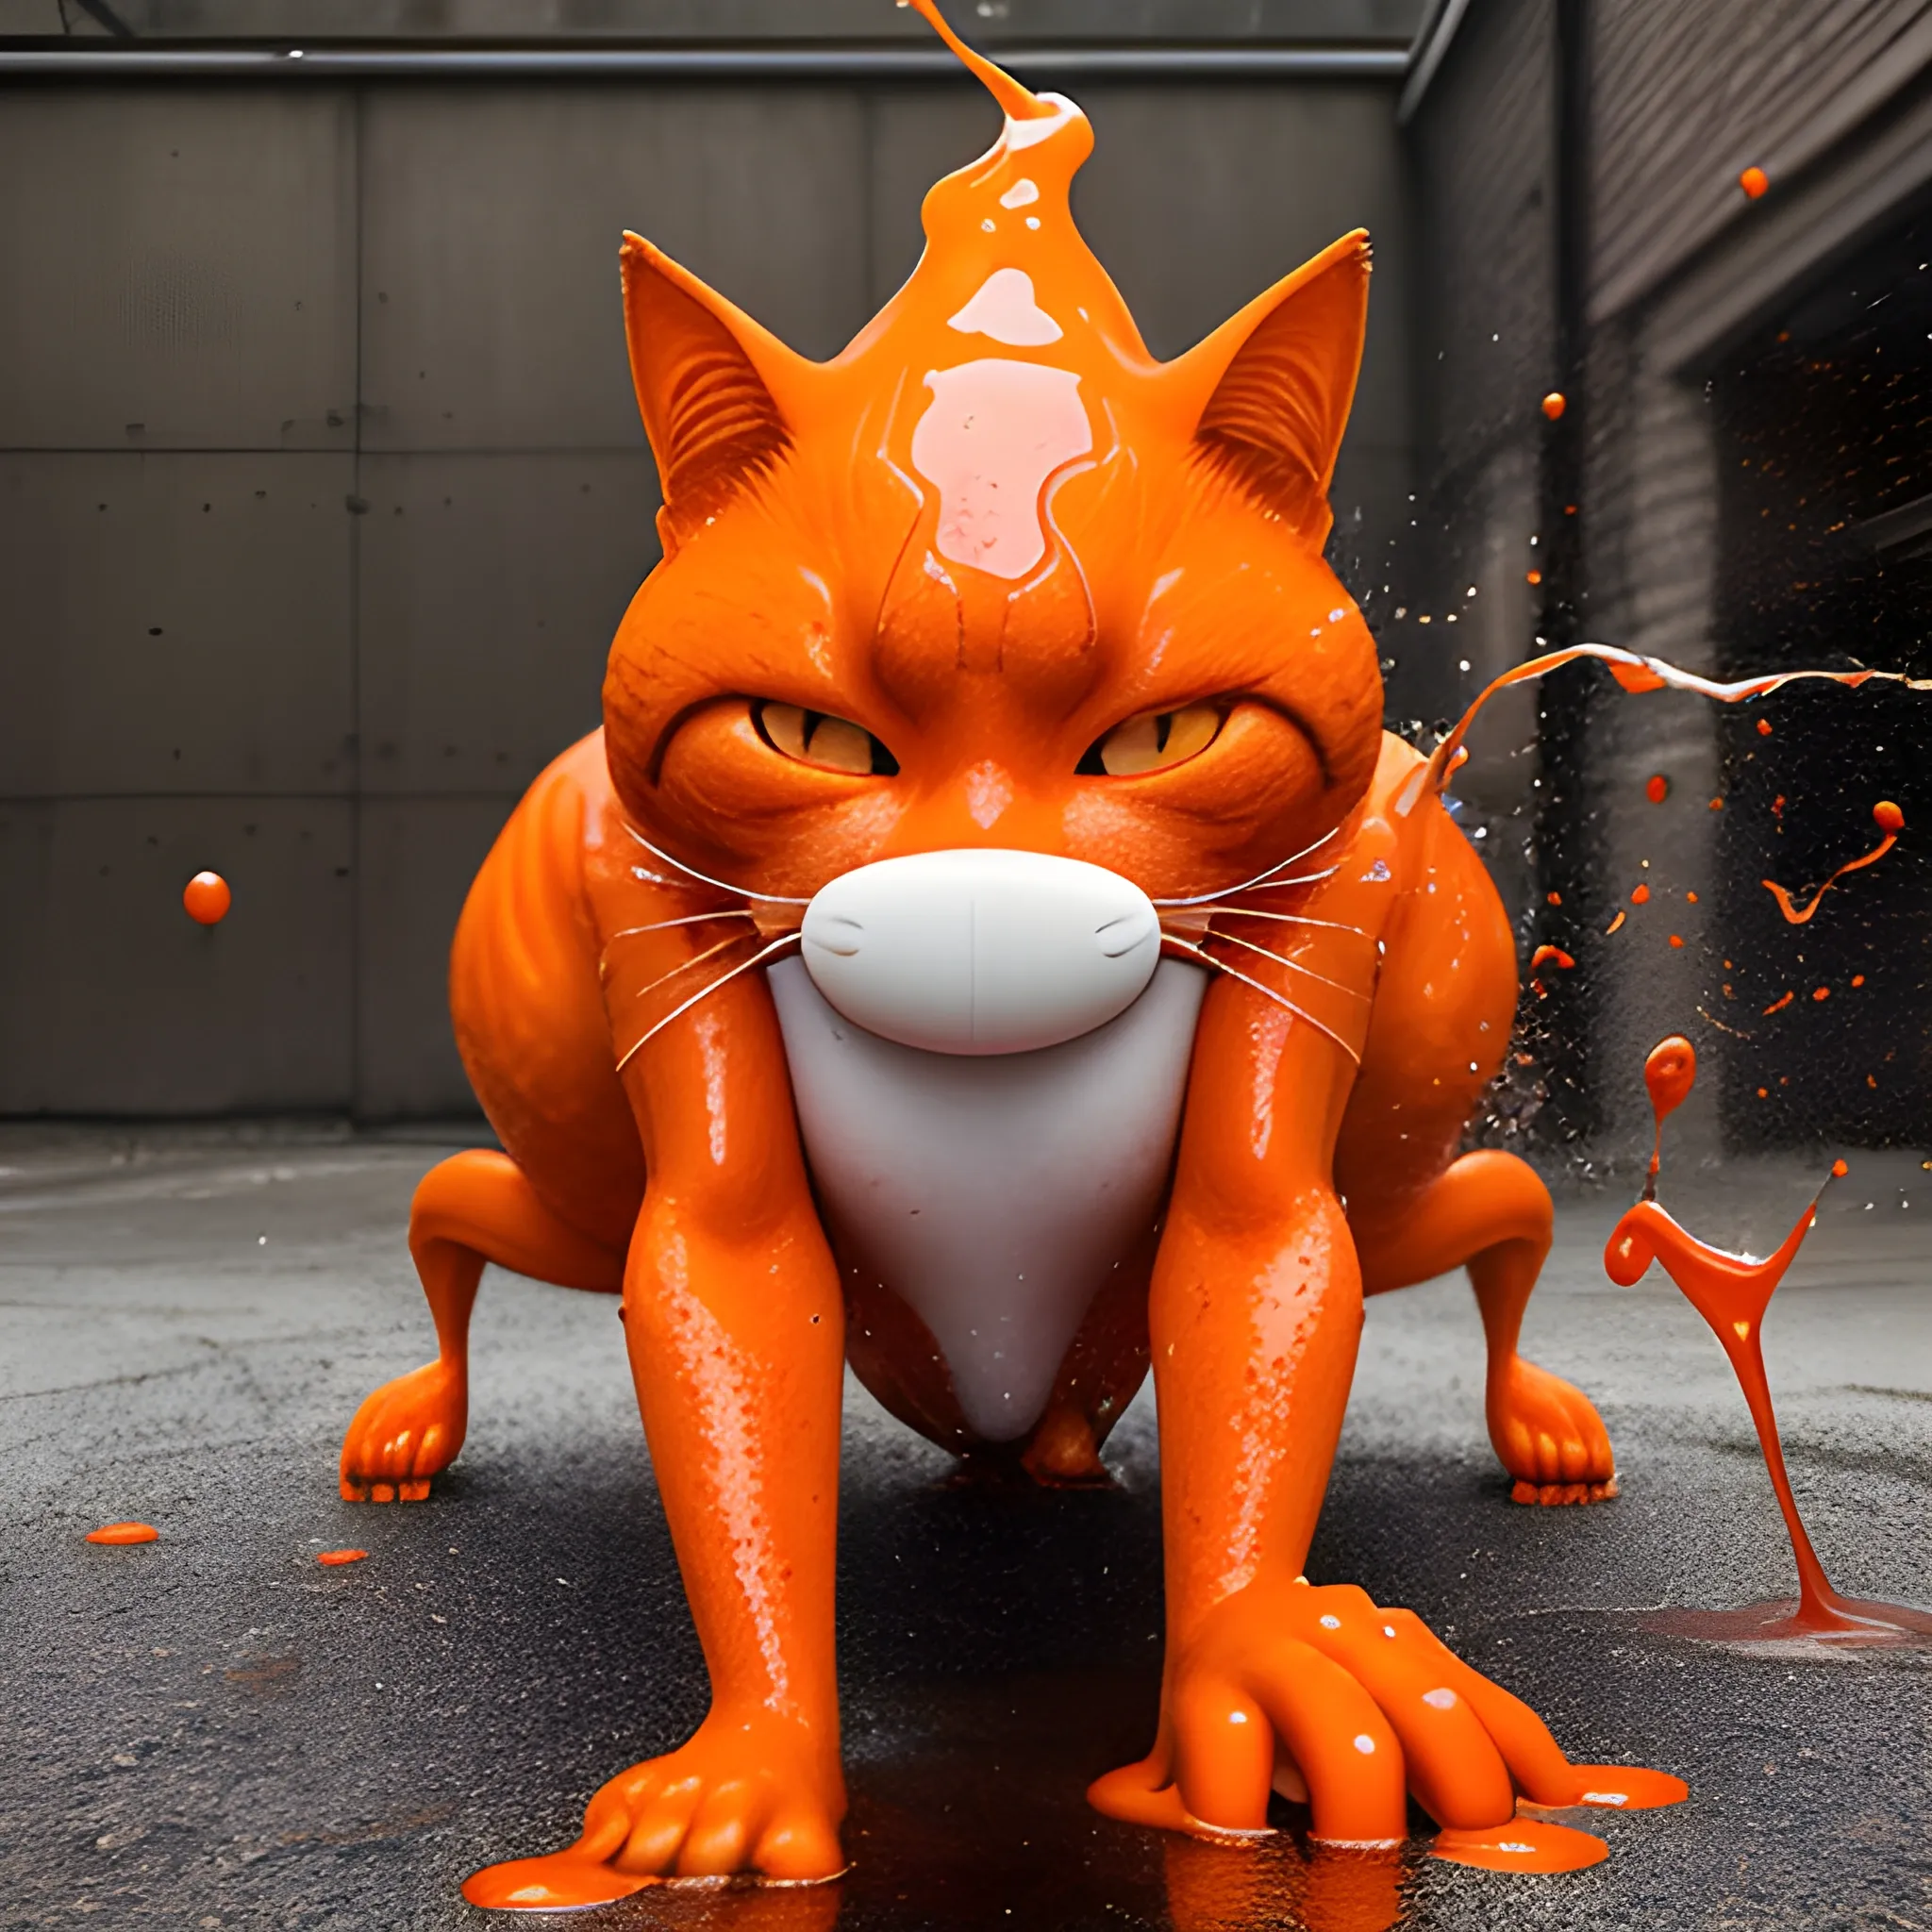 In the classroom, an anthropomorphic little orange cat wearing a white T-shirt and jeans has red liquid flowing from its nose and dripping on the ground. In the background, the students look at it in surprise. Surreal photography style and ultra-real details.